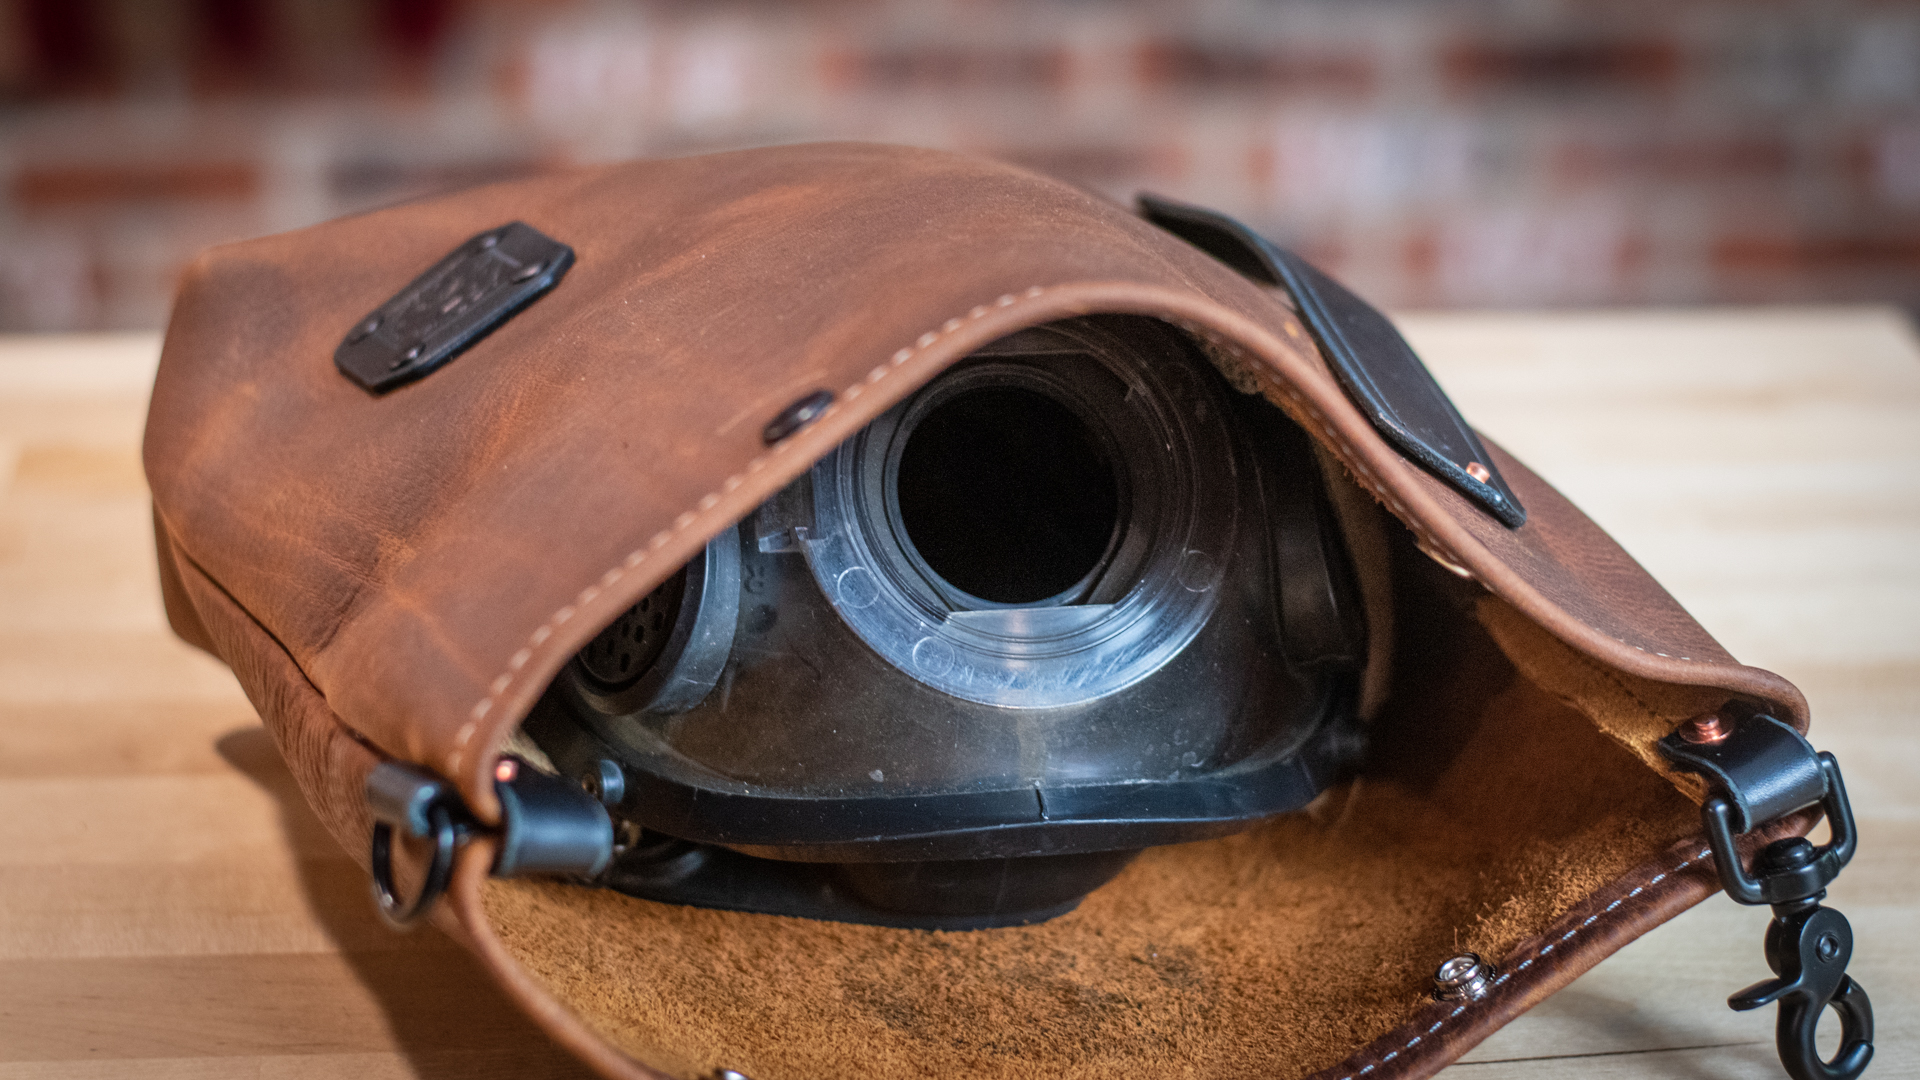 Melting Udsæt operation Leather SCBA Mask Bag - Axe and Awl Leatherworks - Customizable